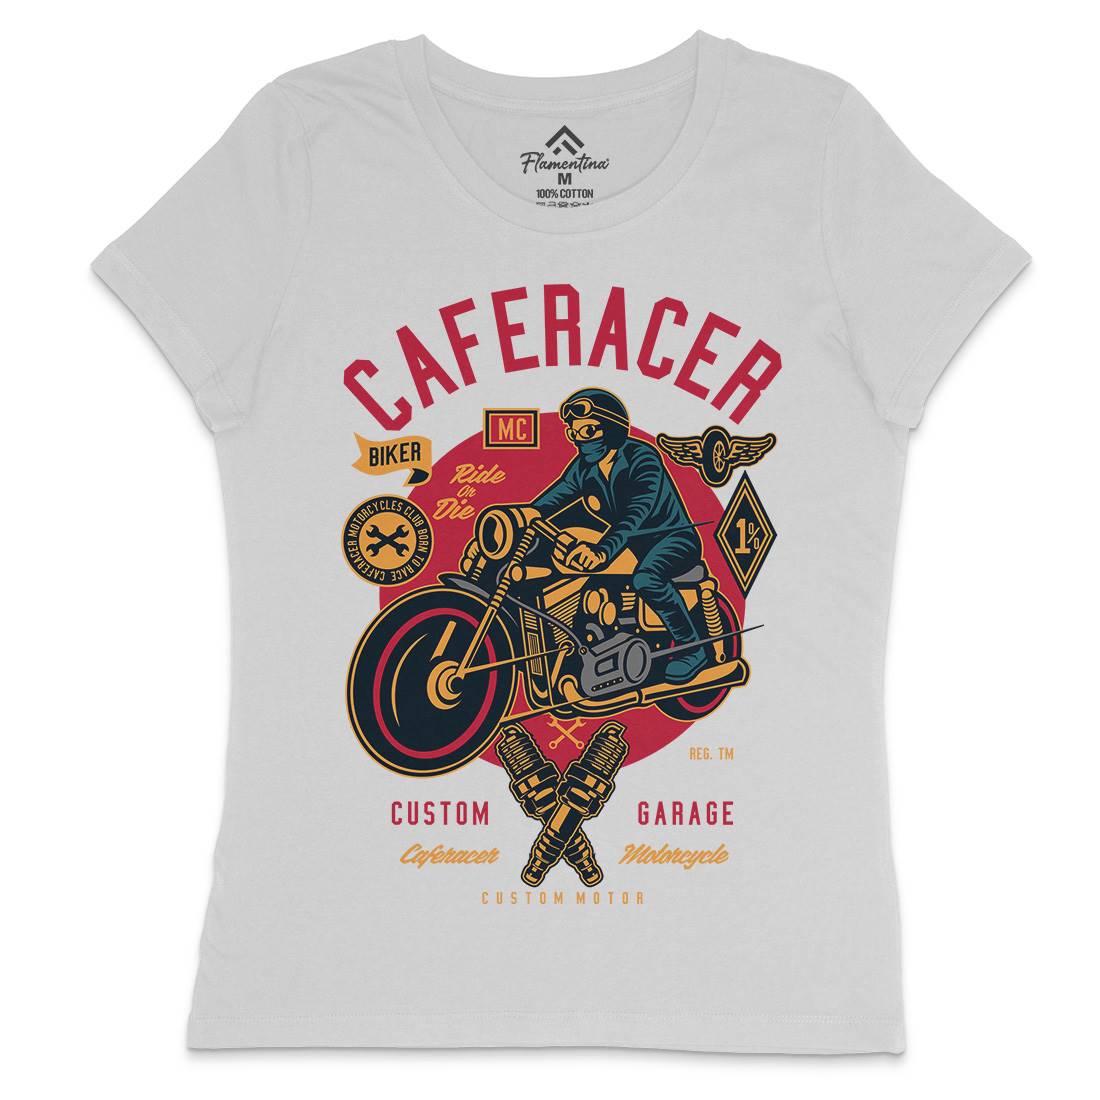 Caferacer Womens Crew Neck T-Shirt Motorcycles D513